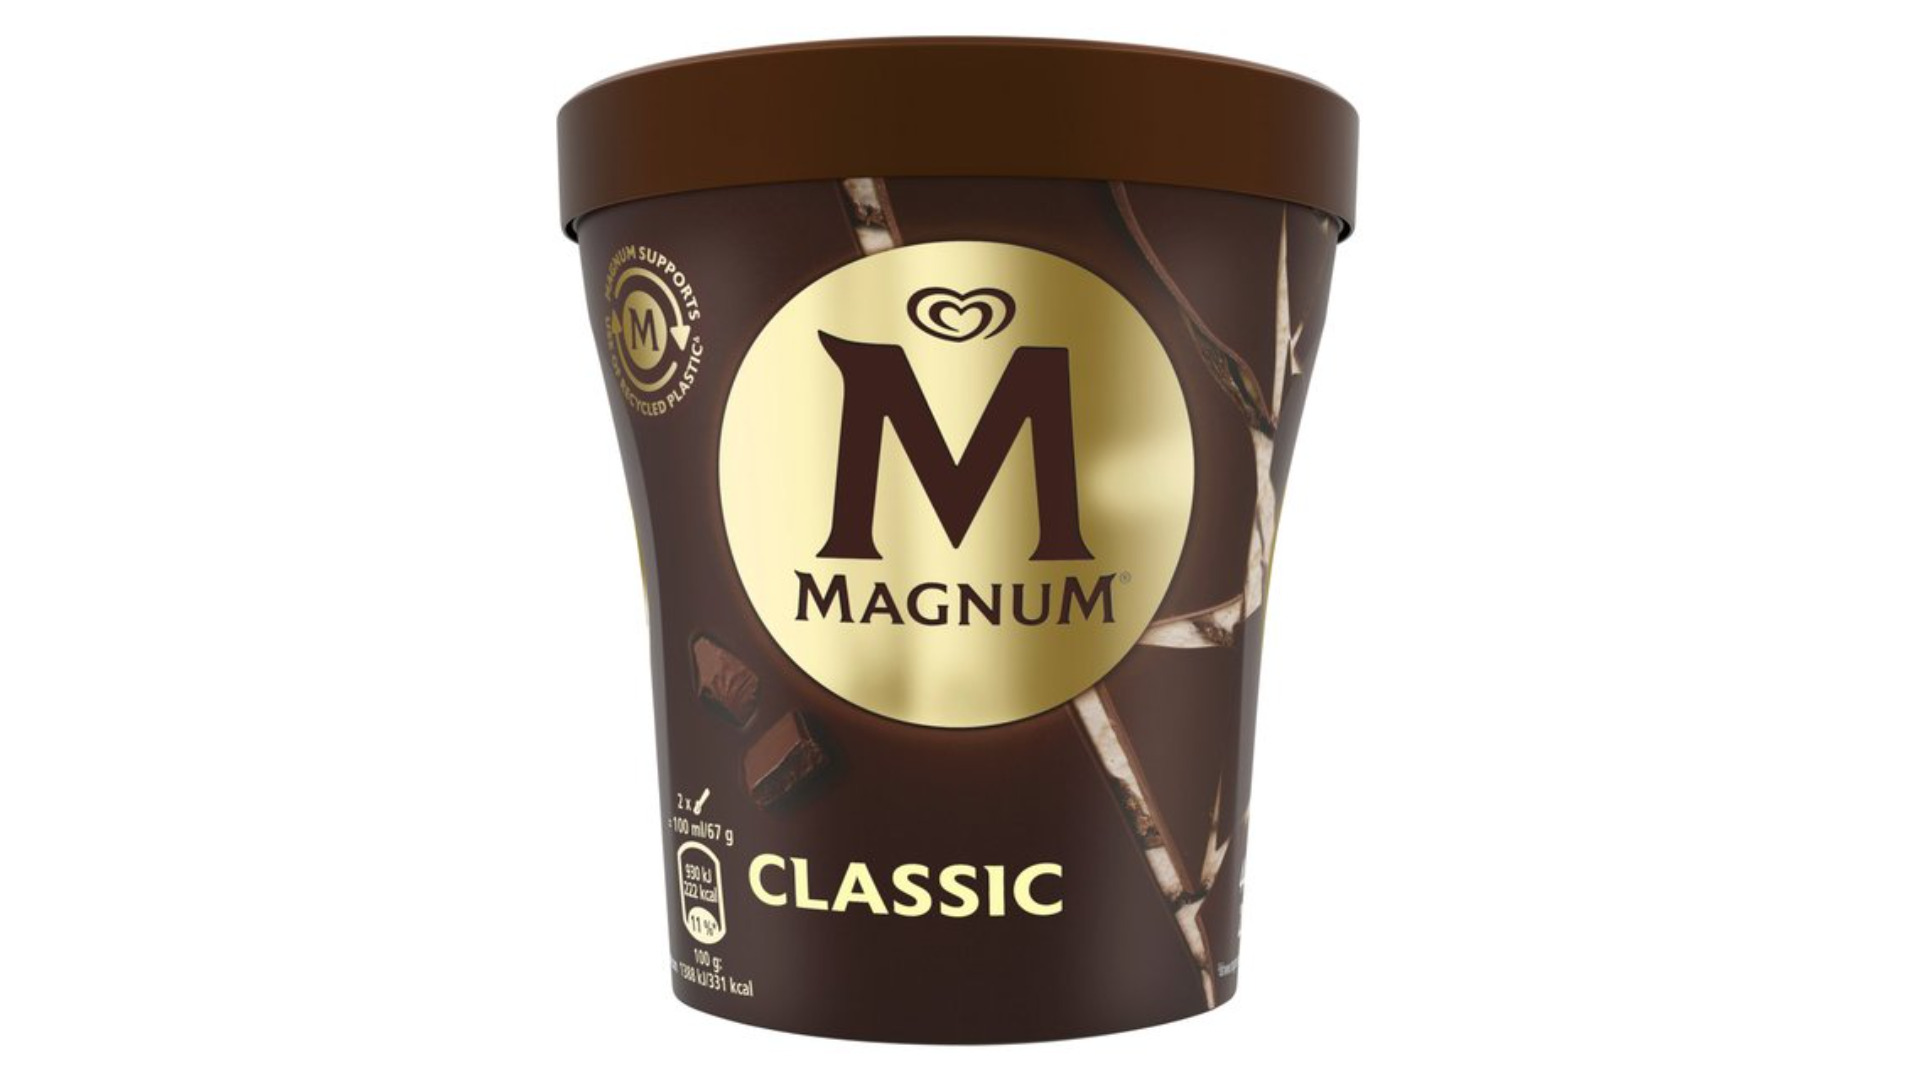 Magnum Tub Classic - Fried Chicken Delivery in Woodford Wells IG8